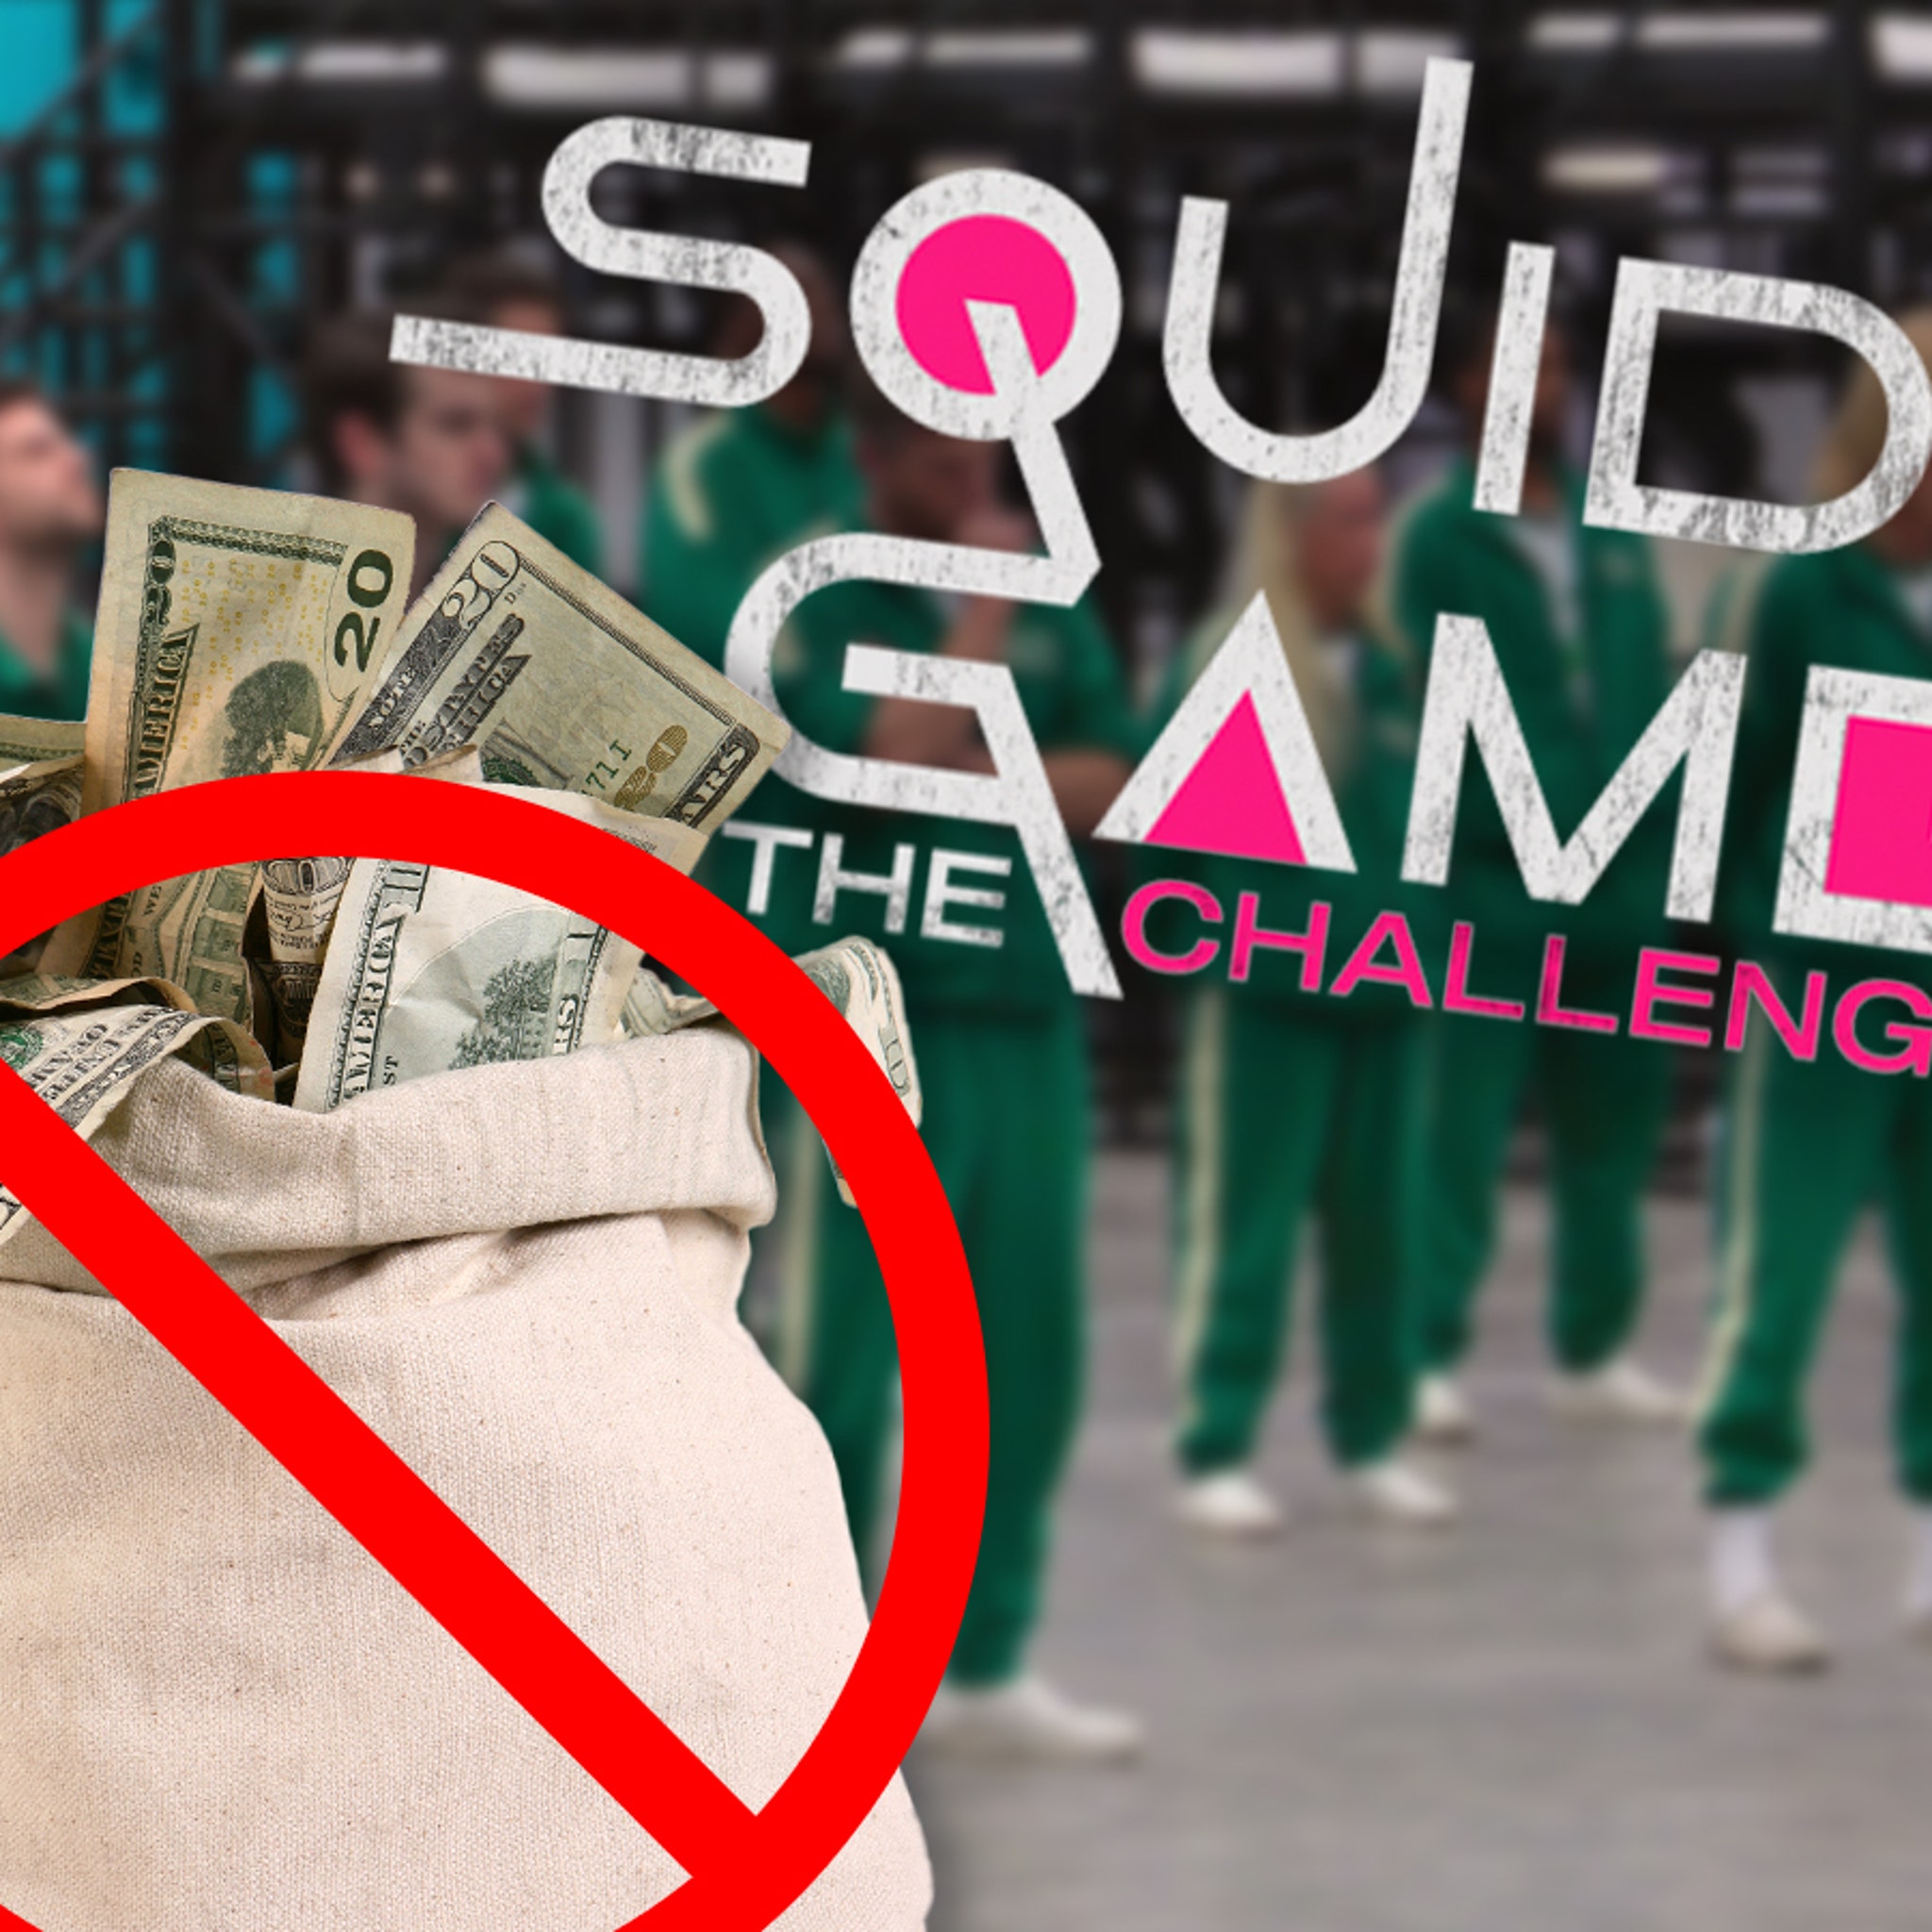 Who Is Phill in Squid Game: The Challenge?